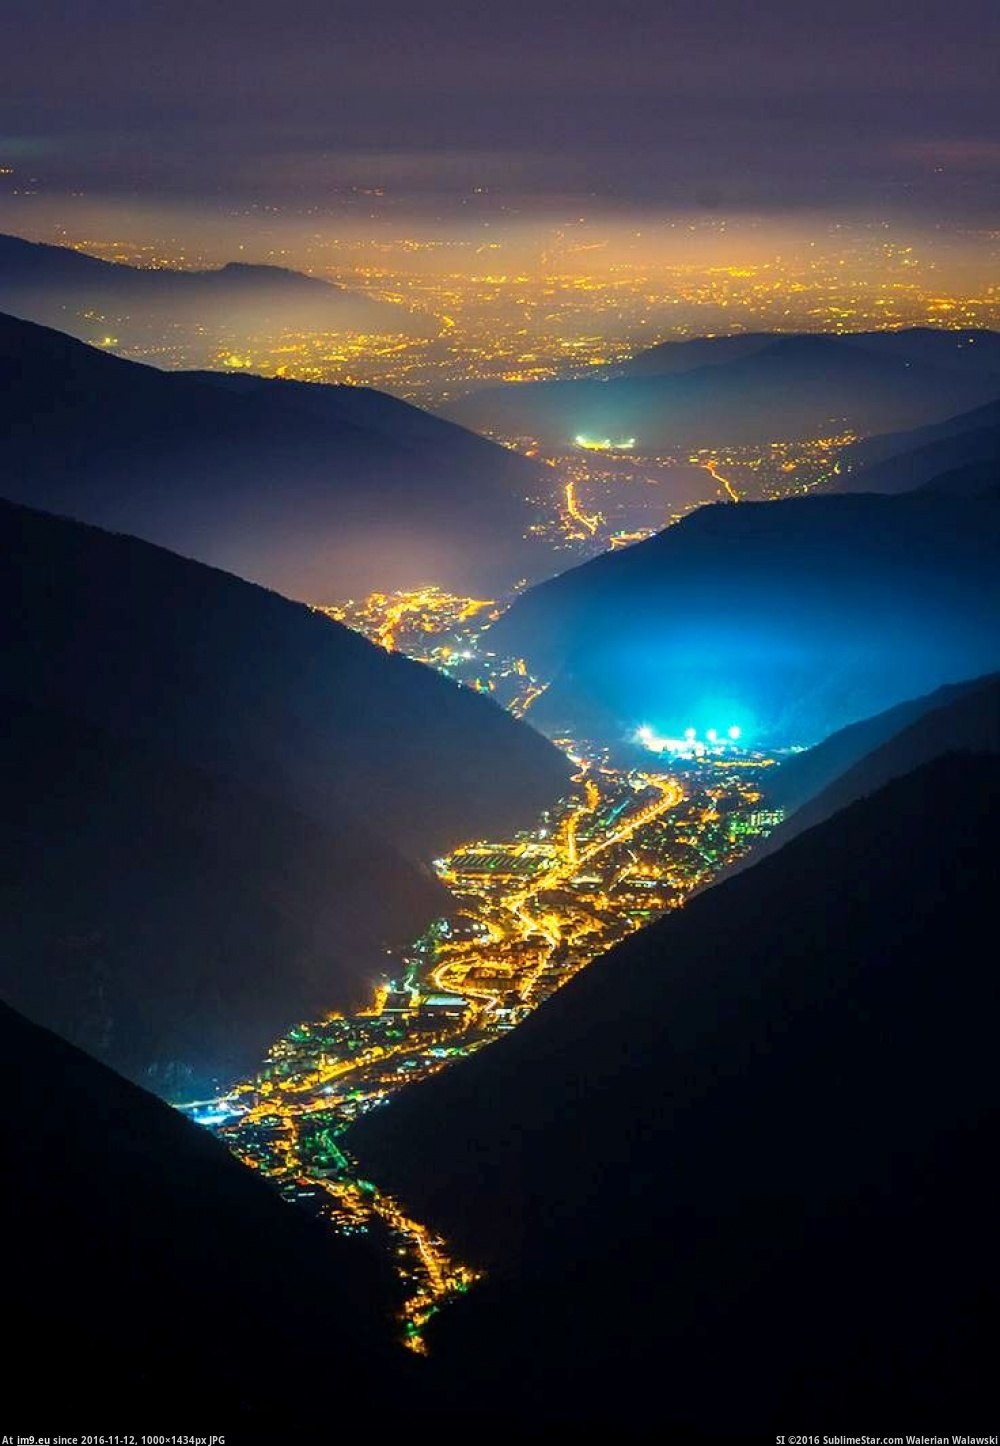 [Pics] Valley of the lights Italy.. (in My r/PICS favs)